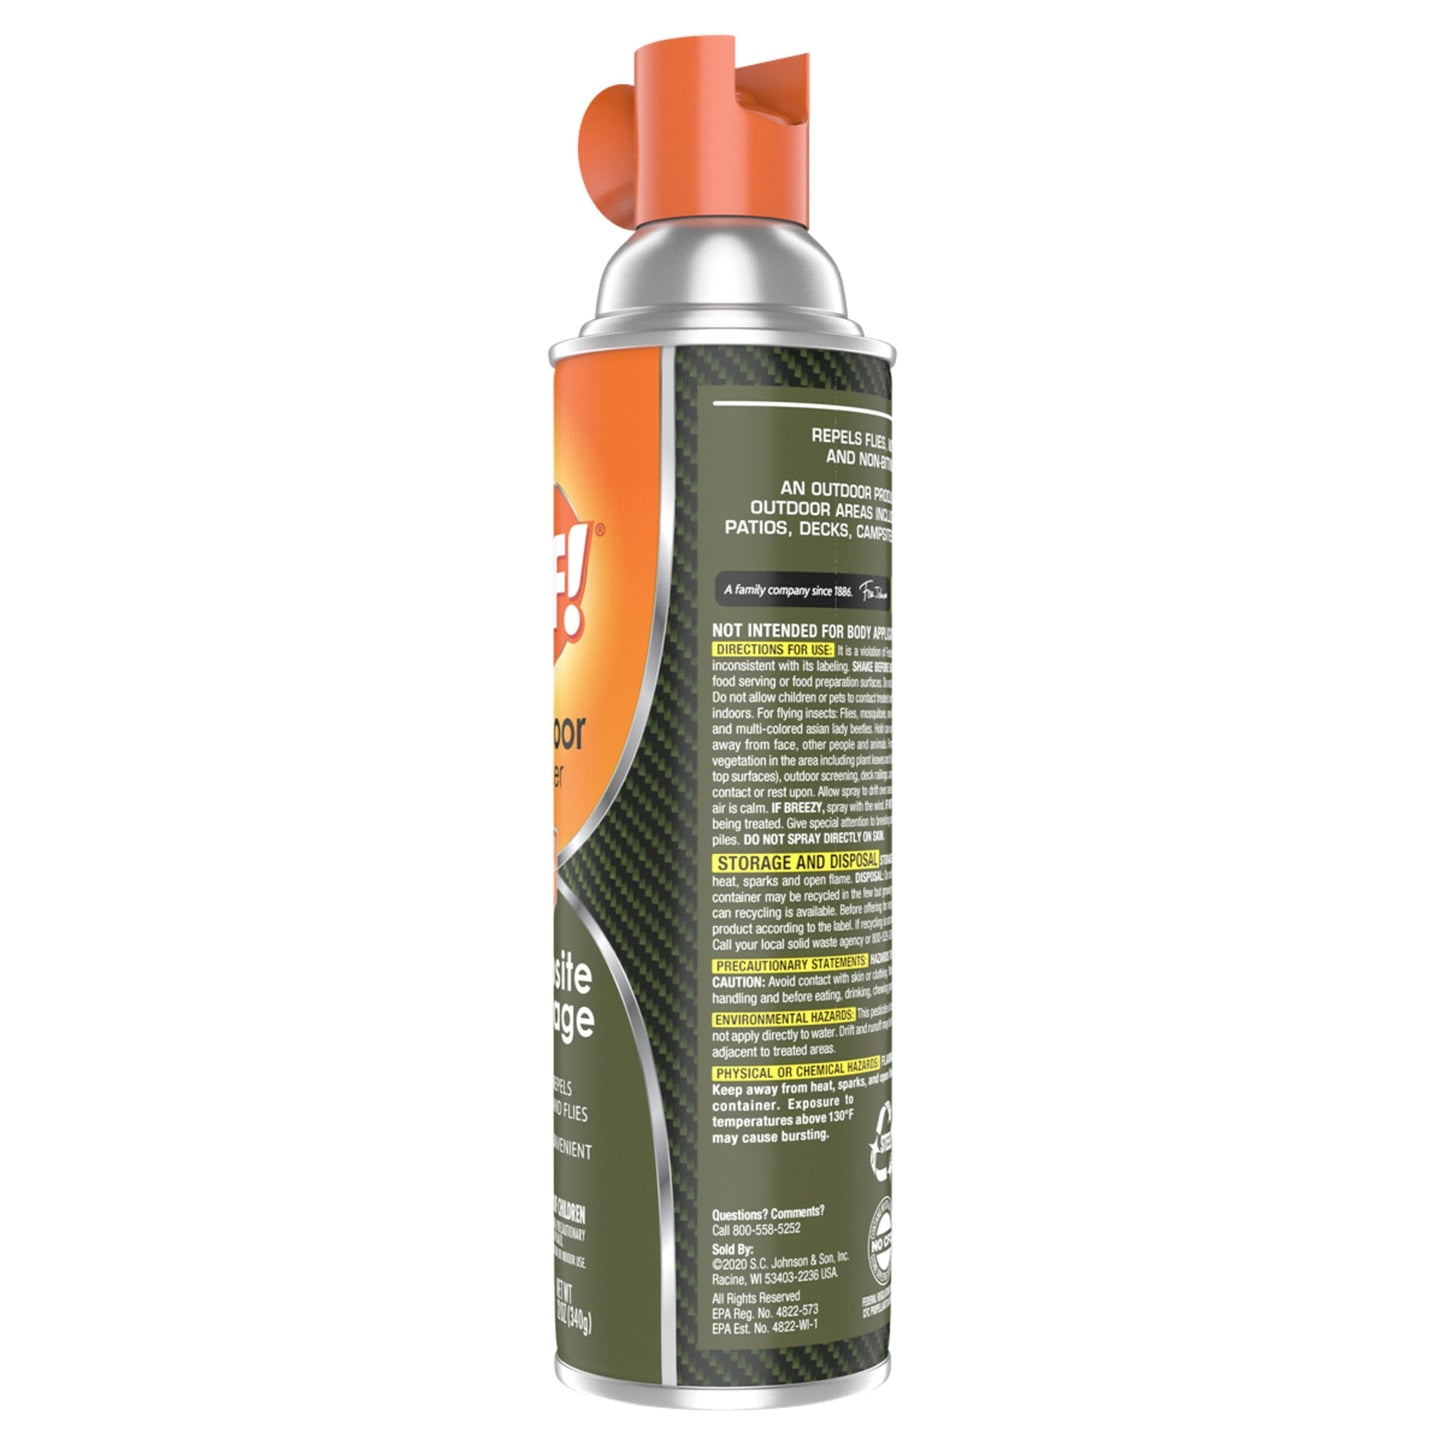 OFF! Outdoor Mosquito Fogger, Campsite Insecticide with up to 6 Hours of Protection, 12 oz